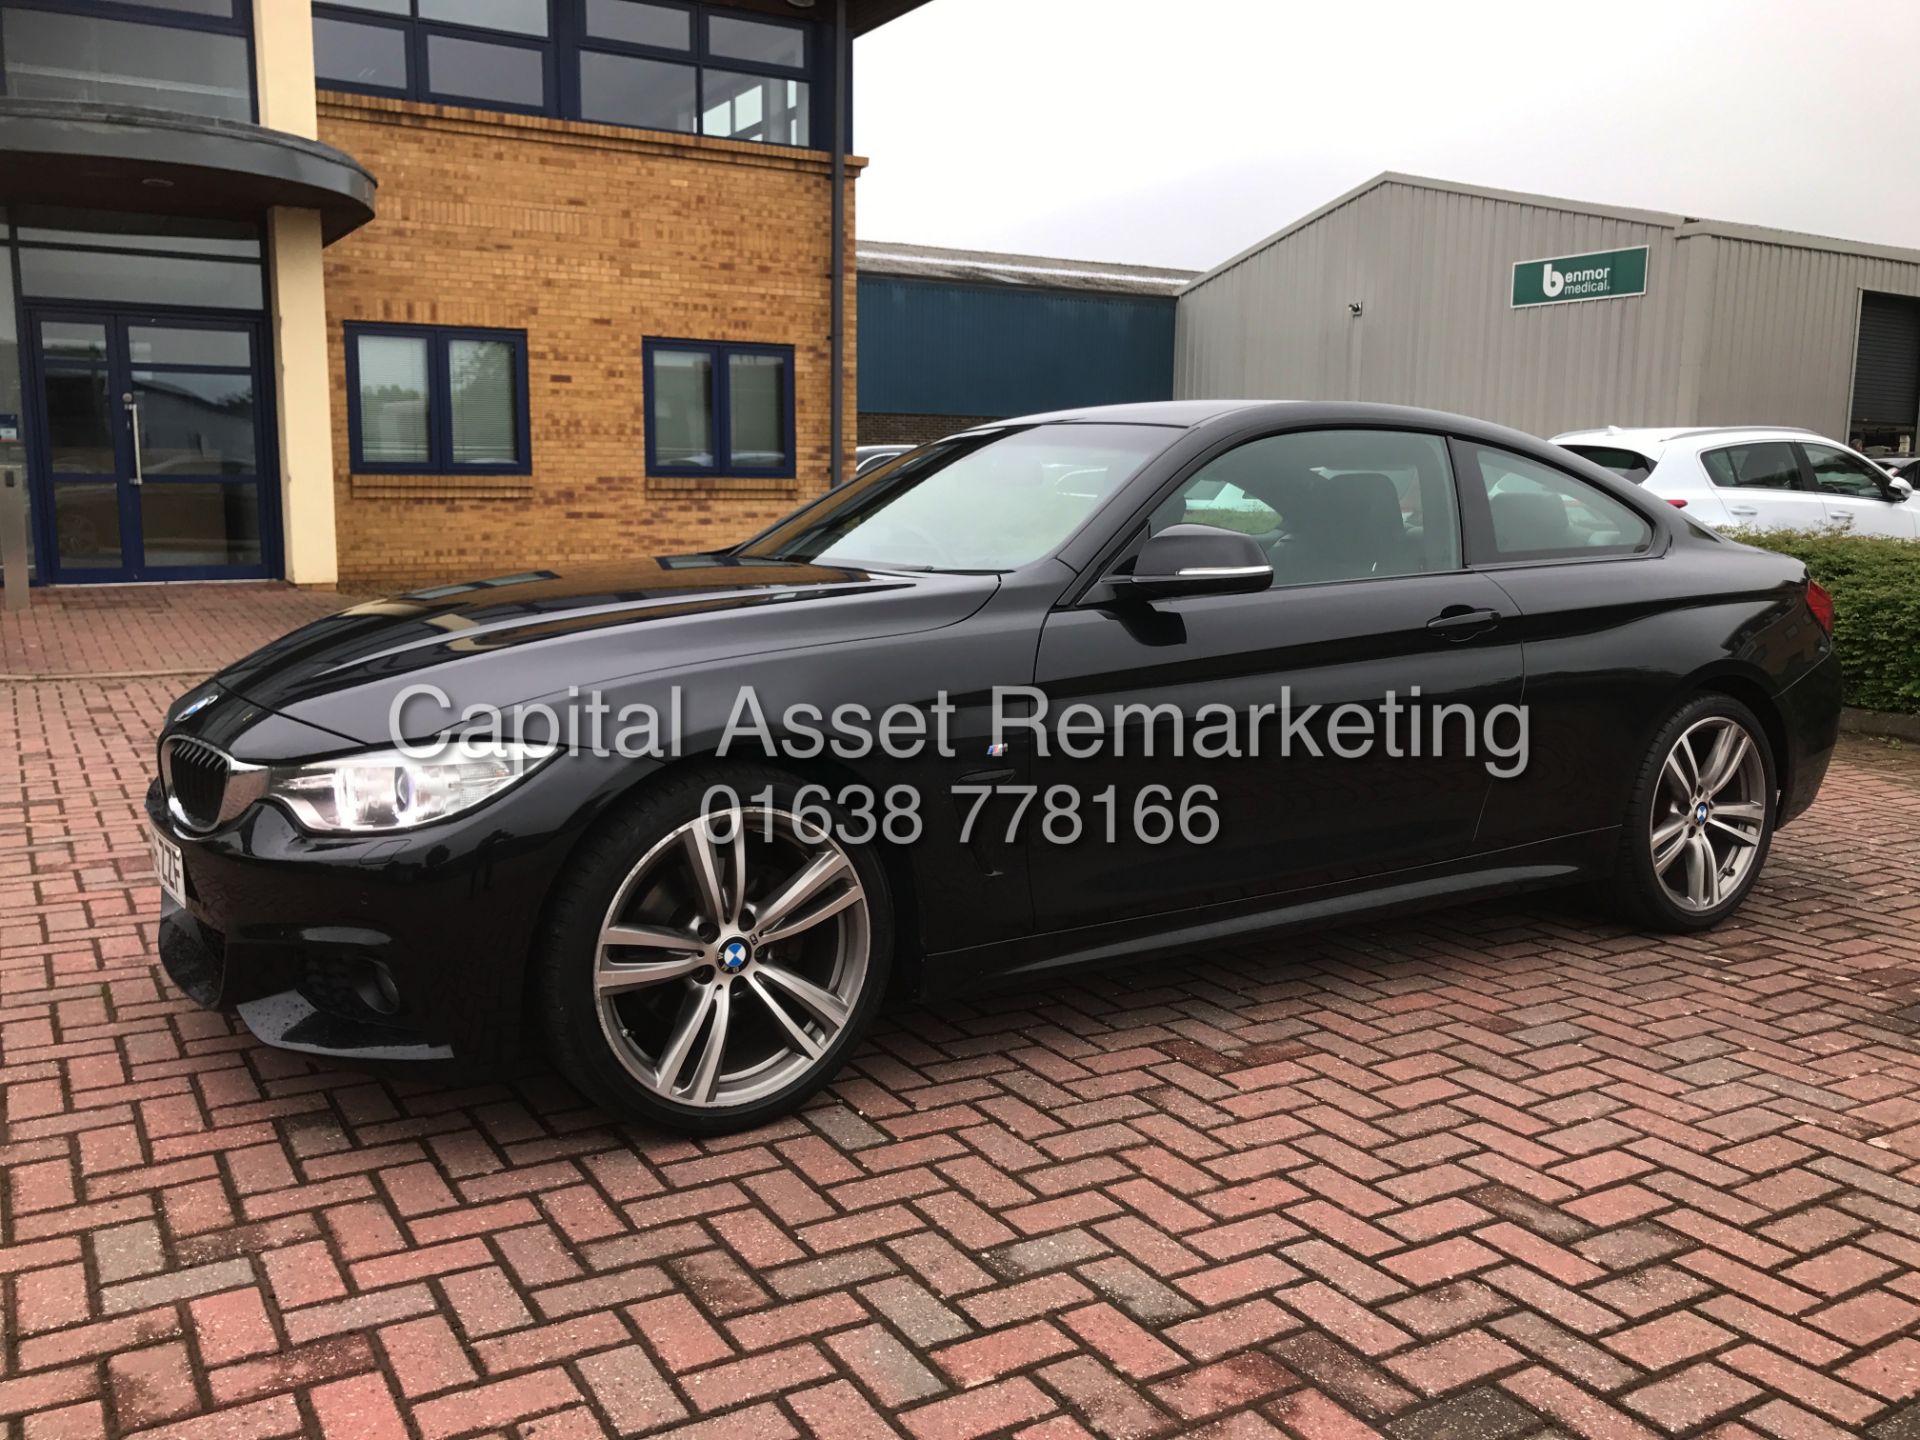 BMW 420D AUTO 8 SPEED "M-SPORT" COUPE (2017 MODEL) 1 OWNER WITH BMW HISTORY - SAT NAV - I DRIVE - Image 5 of 25